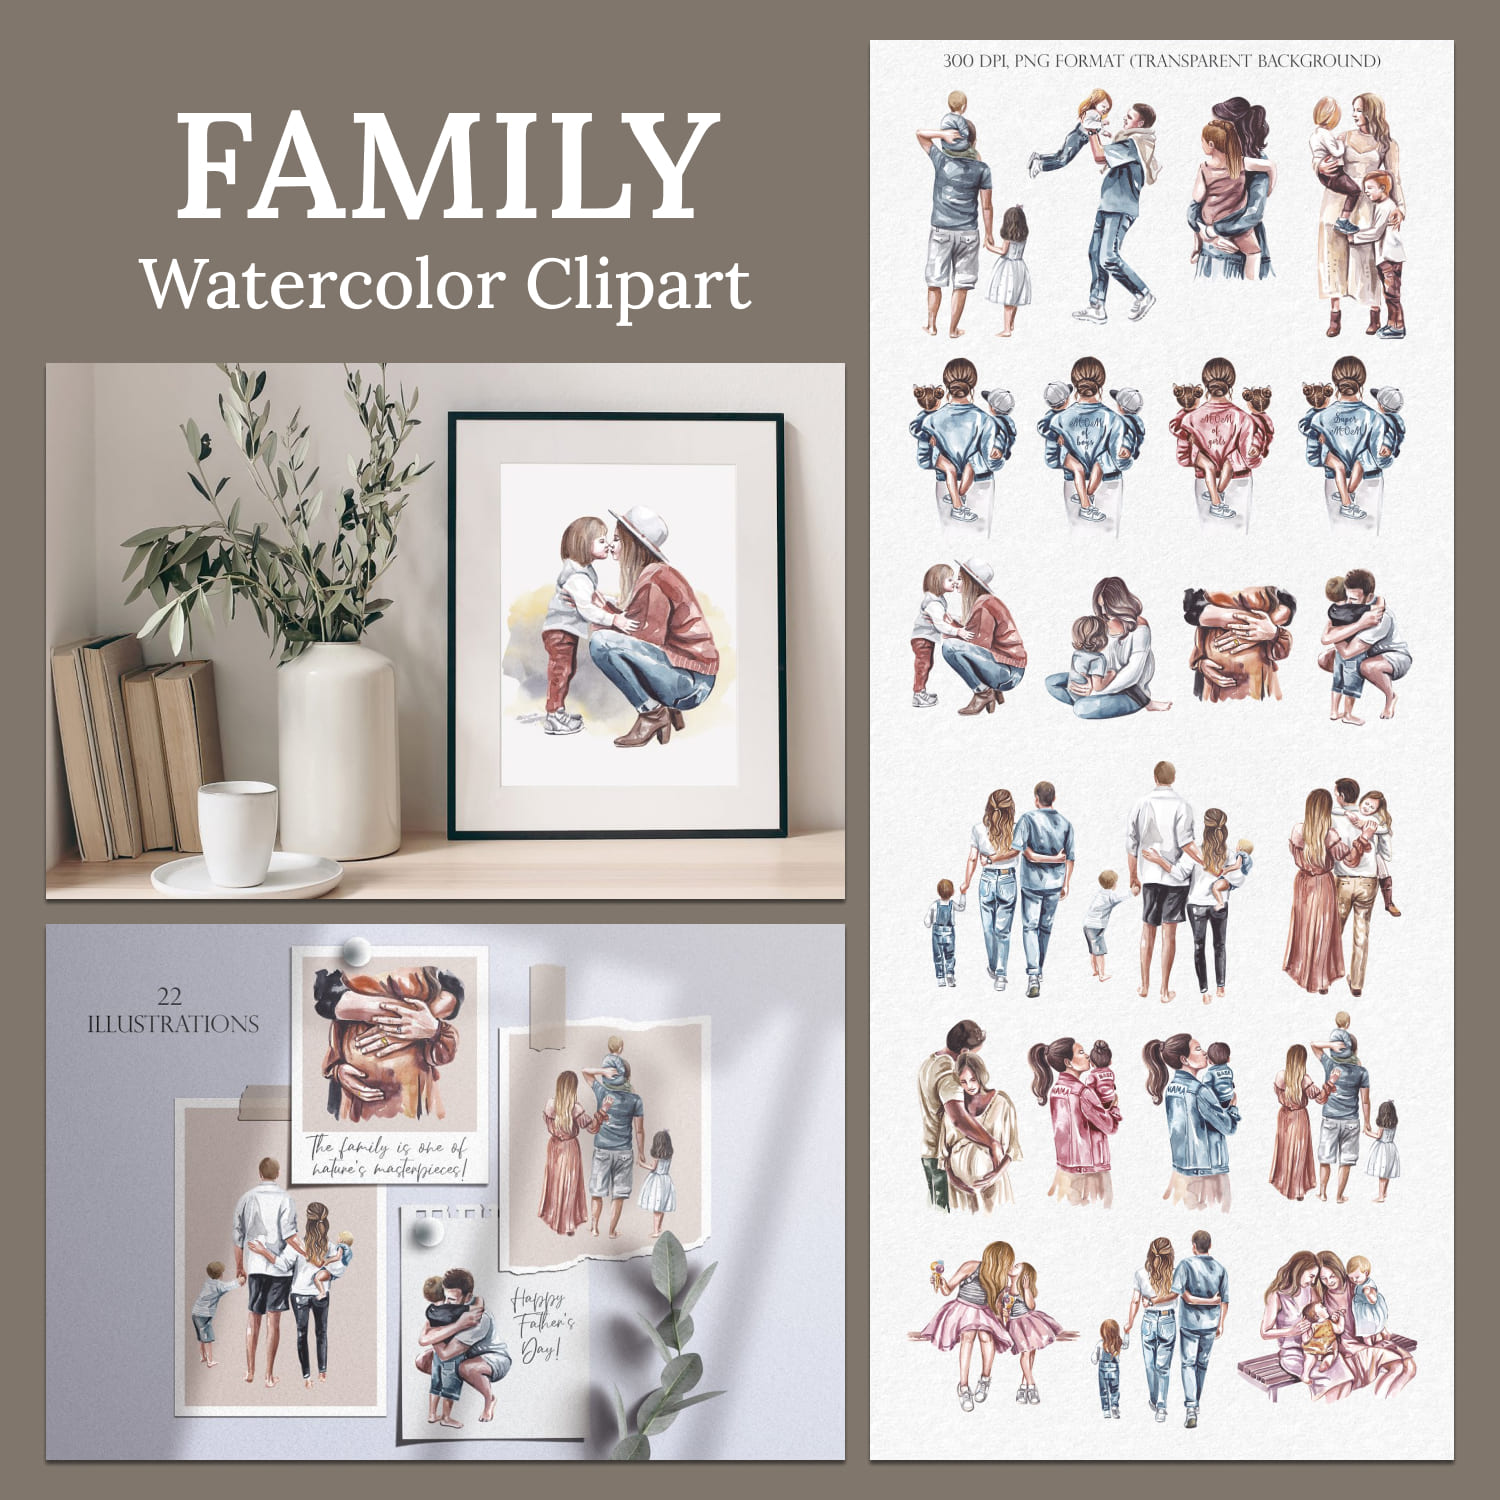 Family watercolor clipart - main image preview.